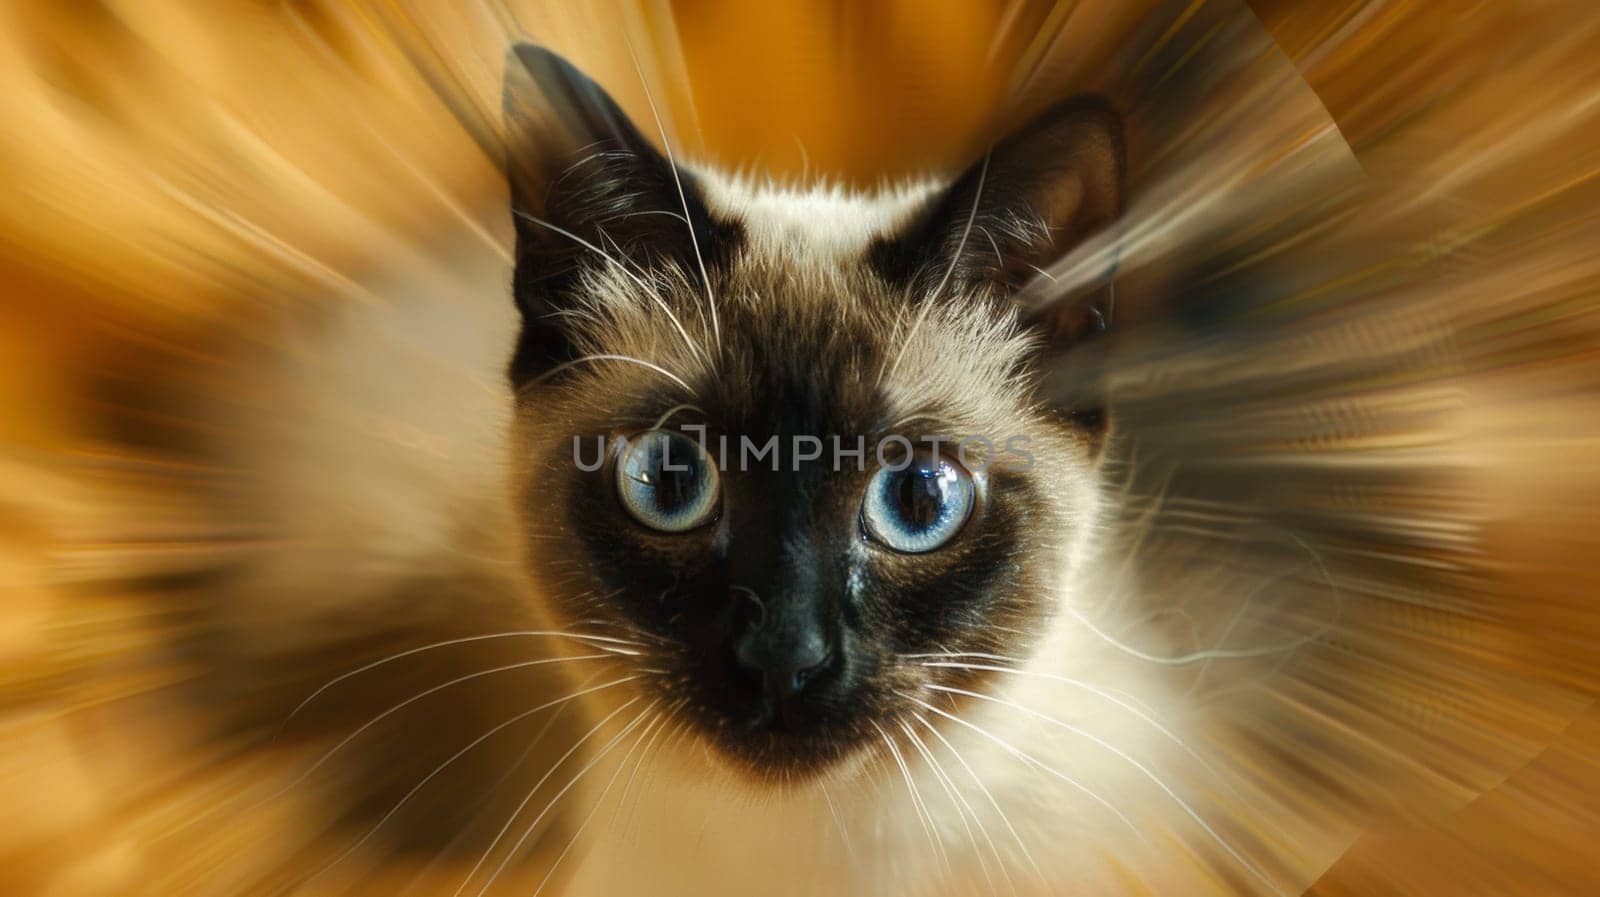 A close up of a cat with blue eyes looking at the camera, AI by starush